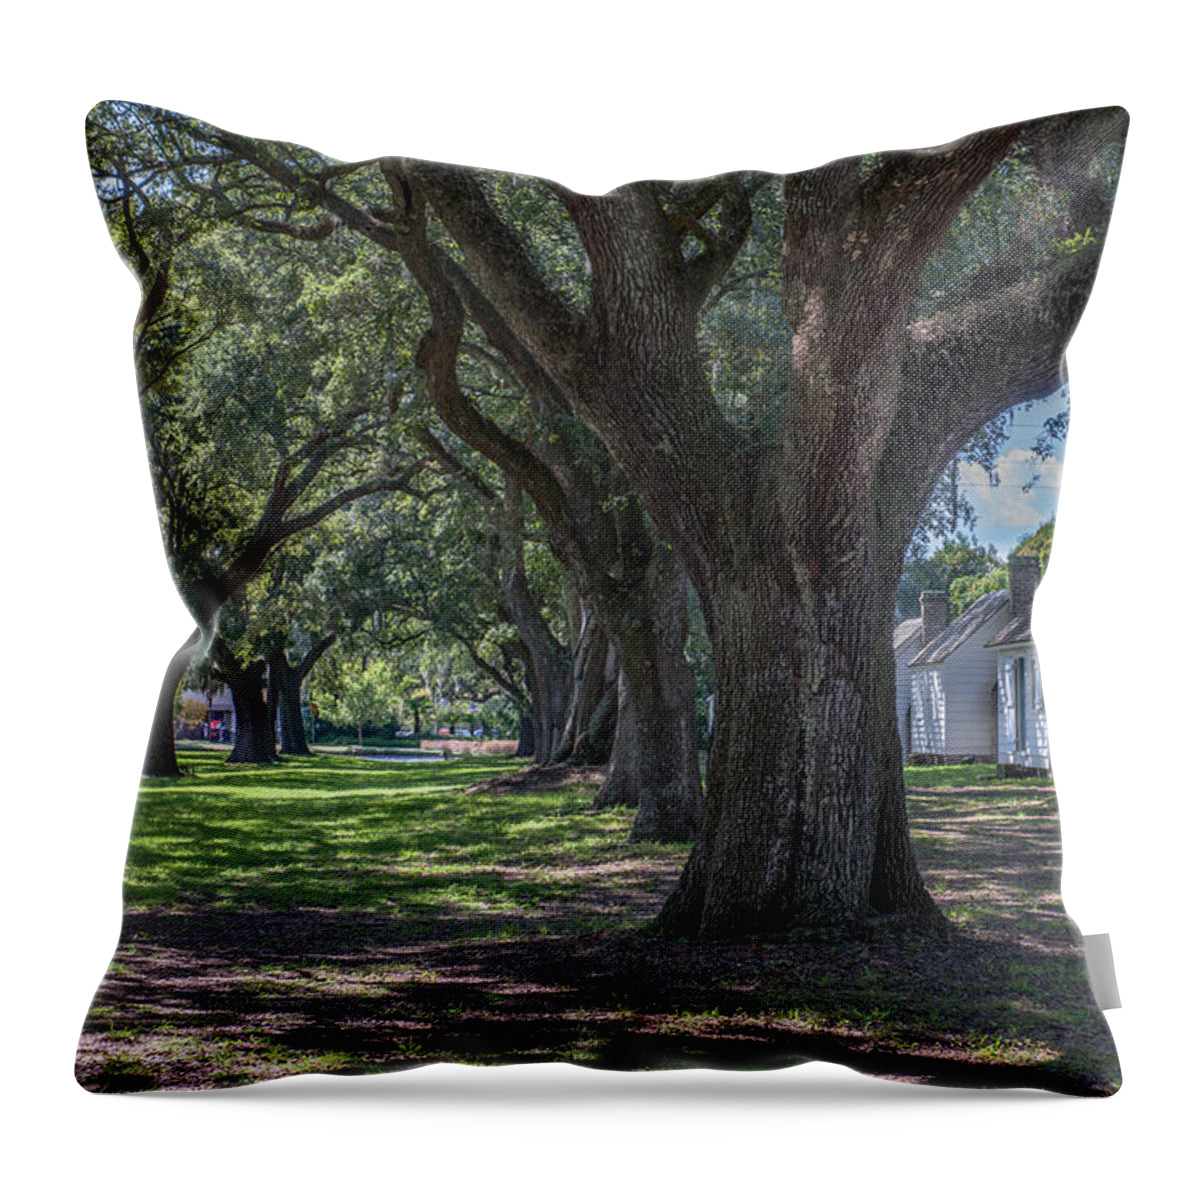 Transition To Freedom Throw Pillow featuring the photograph Transition to Freedom by Dale Powell